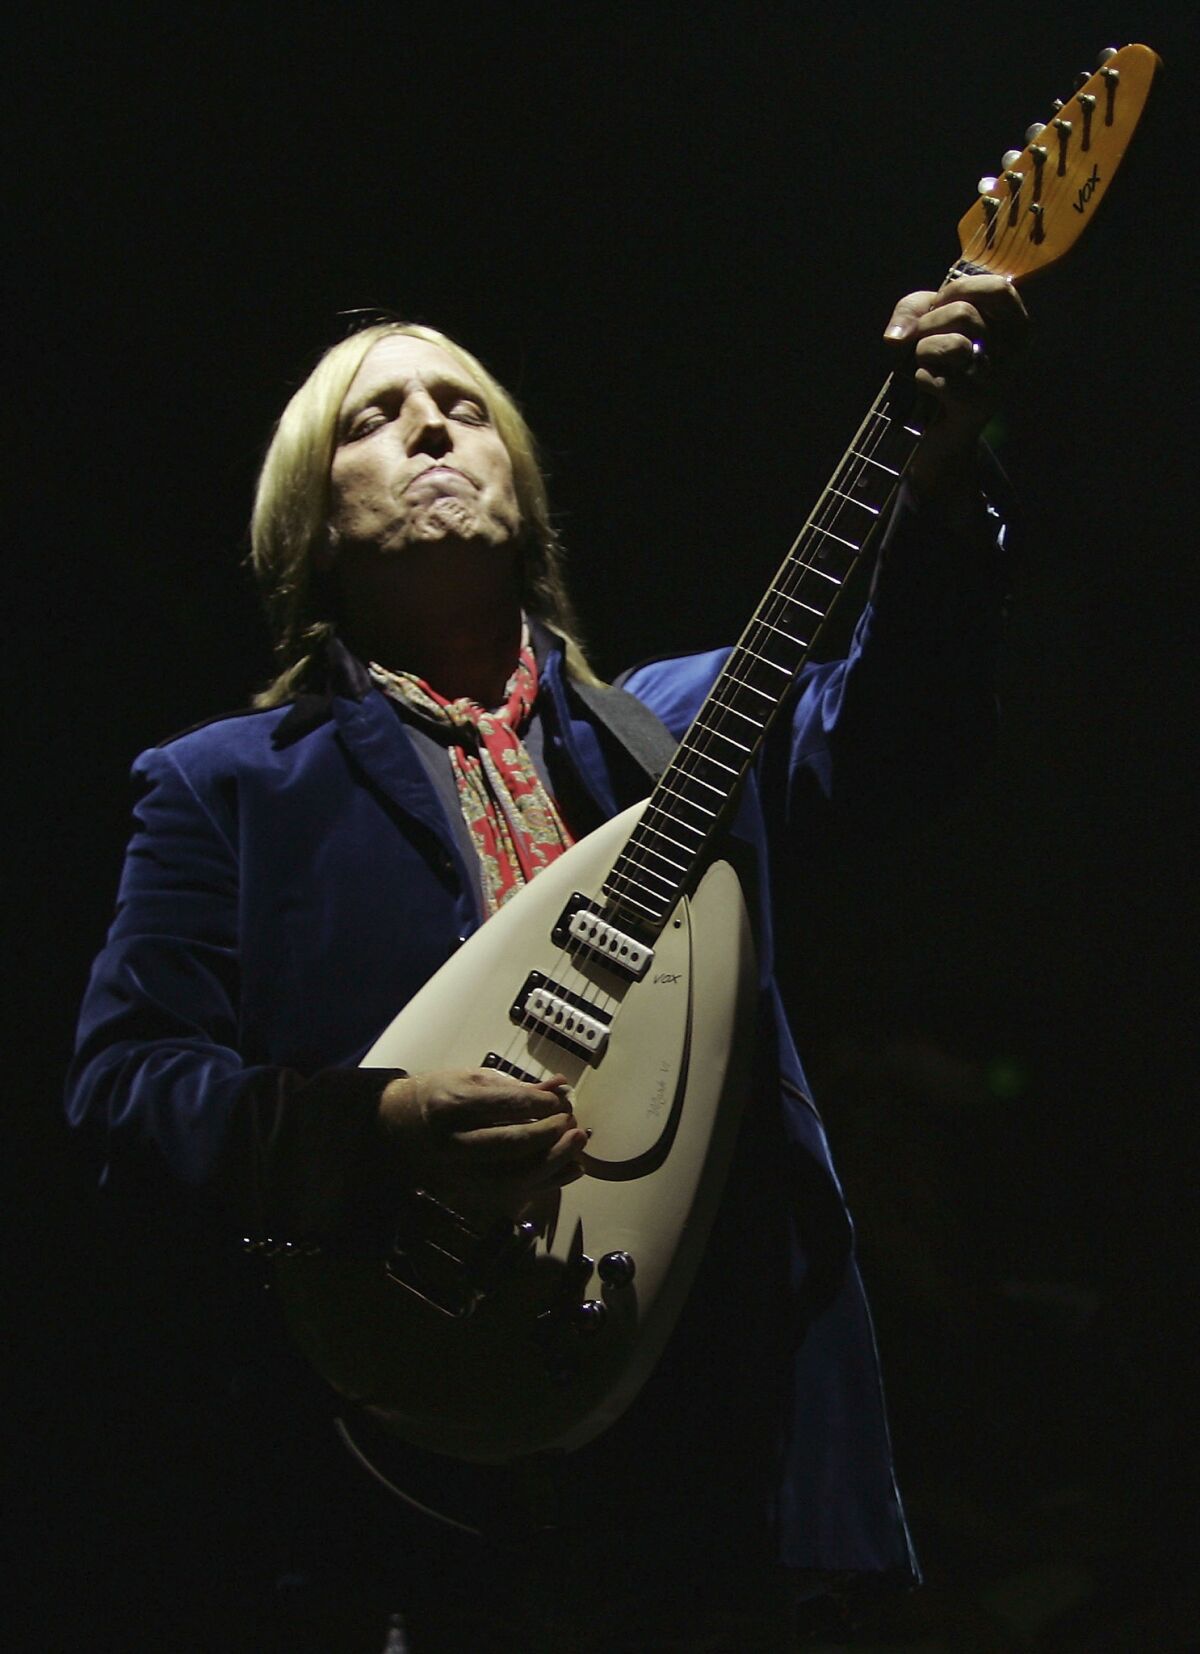 How many songs did Tom Petty sing with reference to marijuana? Too many to count.